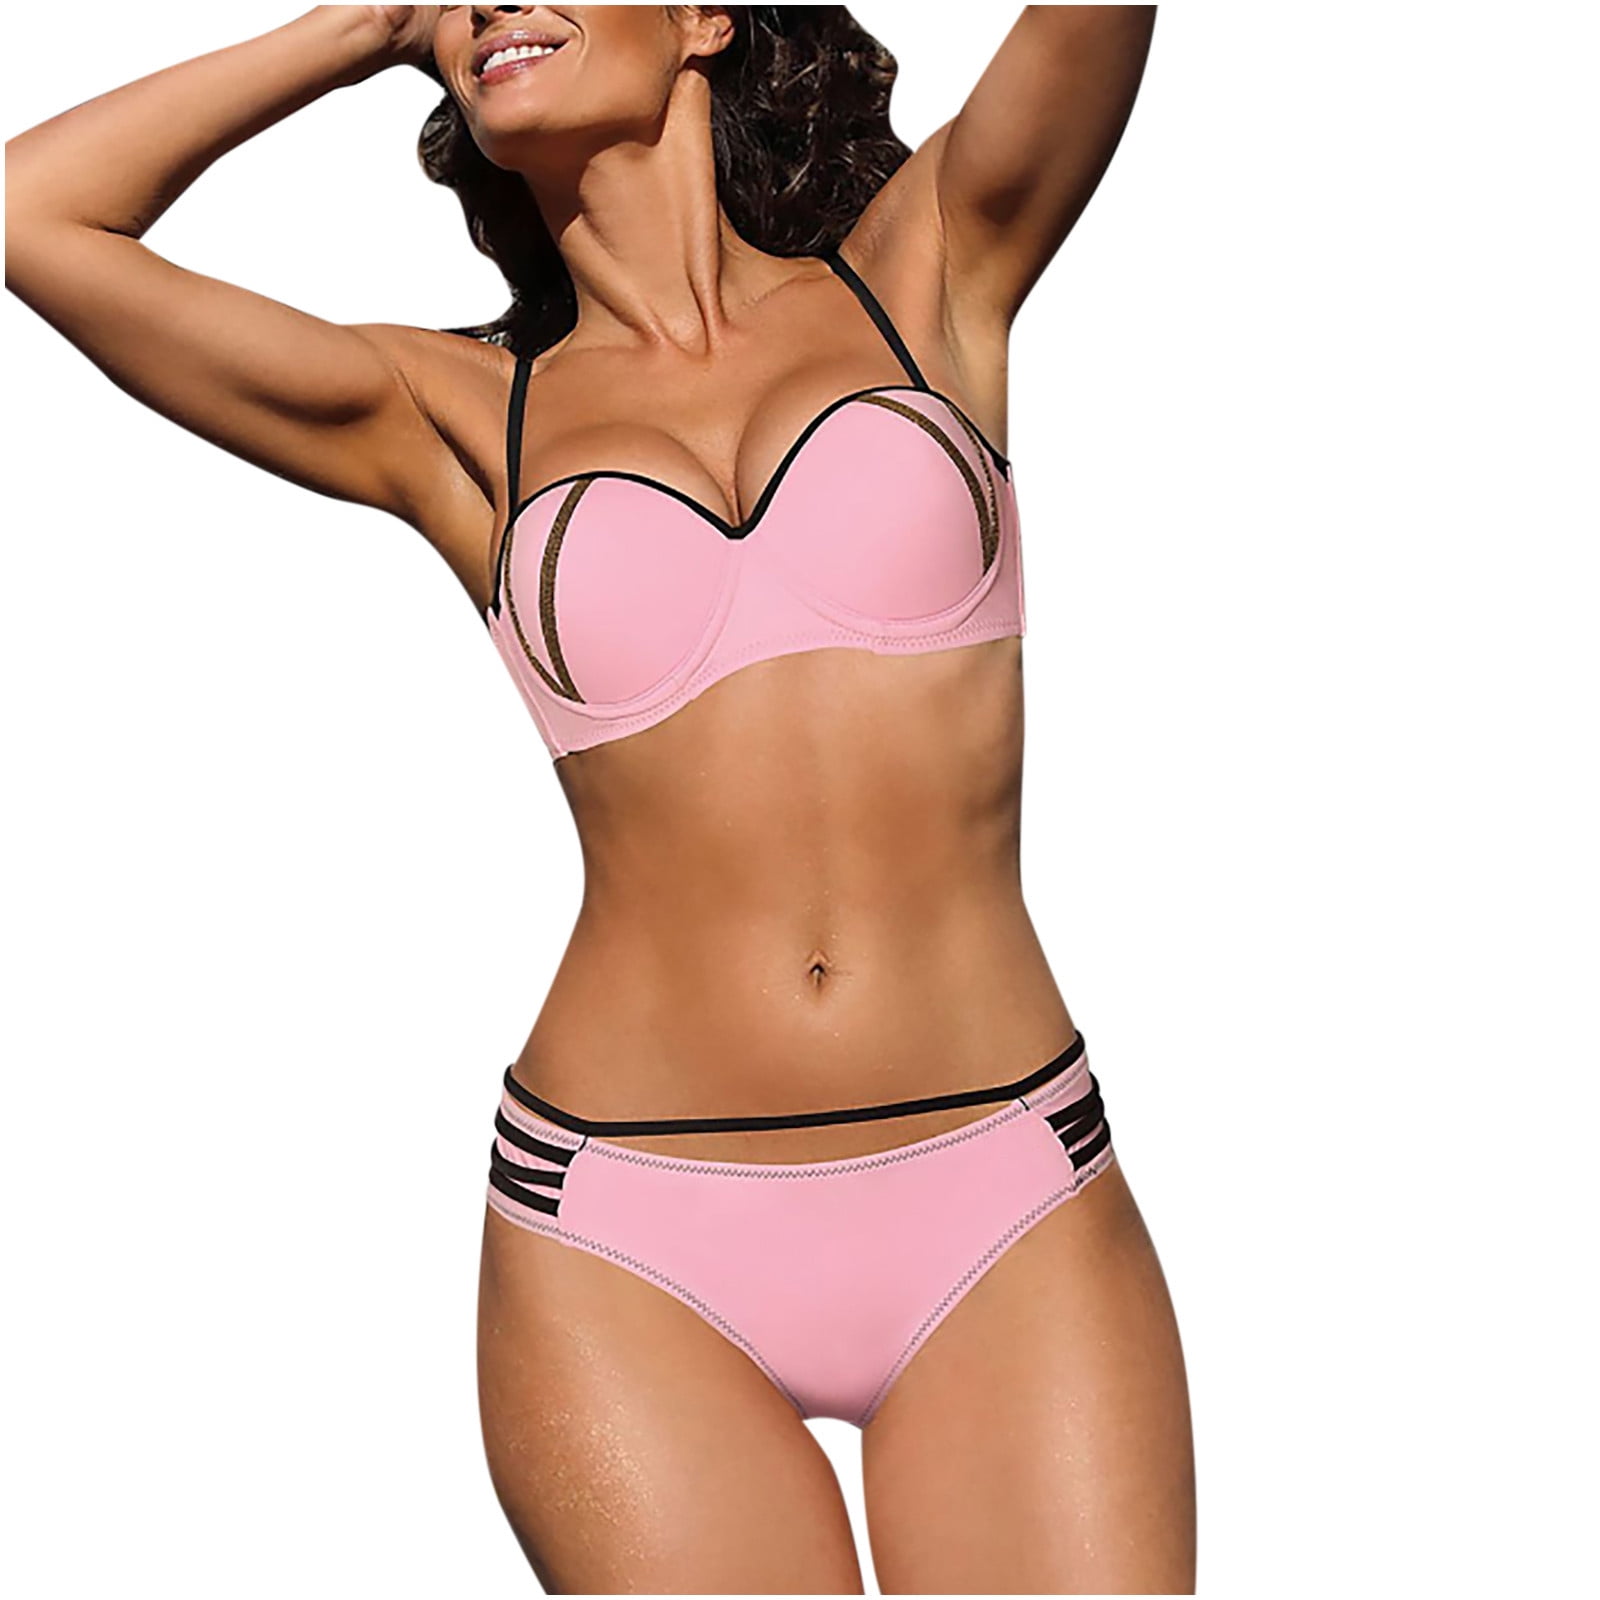 VKEKIEO Two-Piece Sets Swimsuit Sport Bra Style Back-Smoothing Hot Pink XL